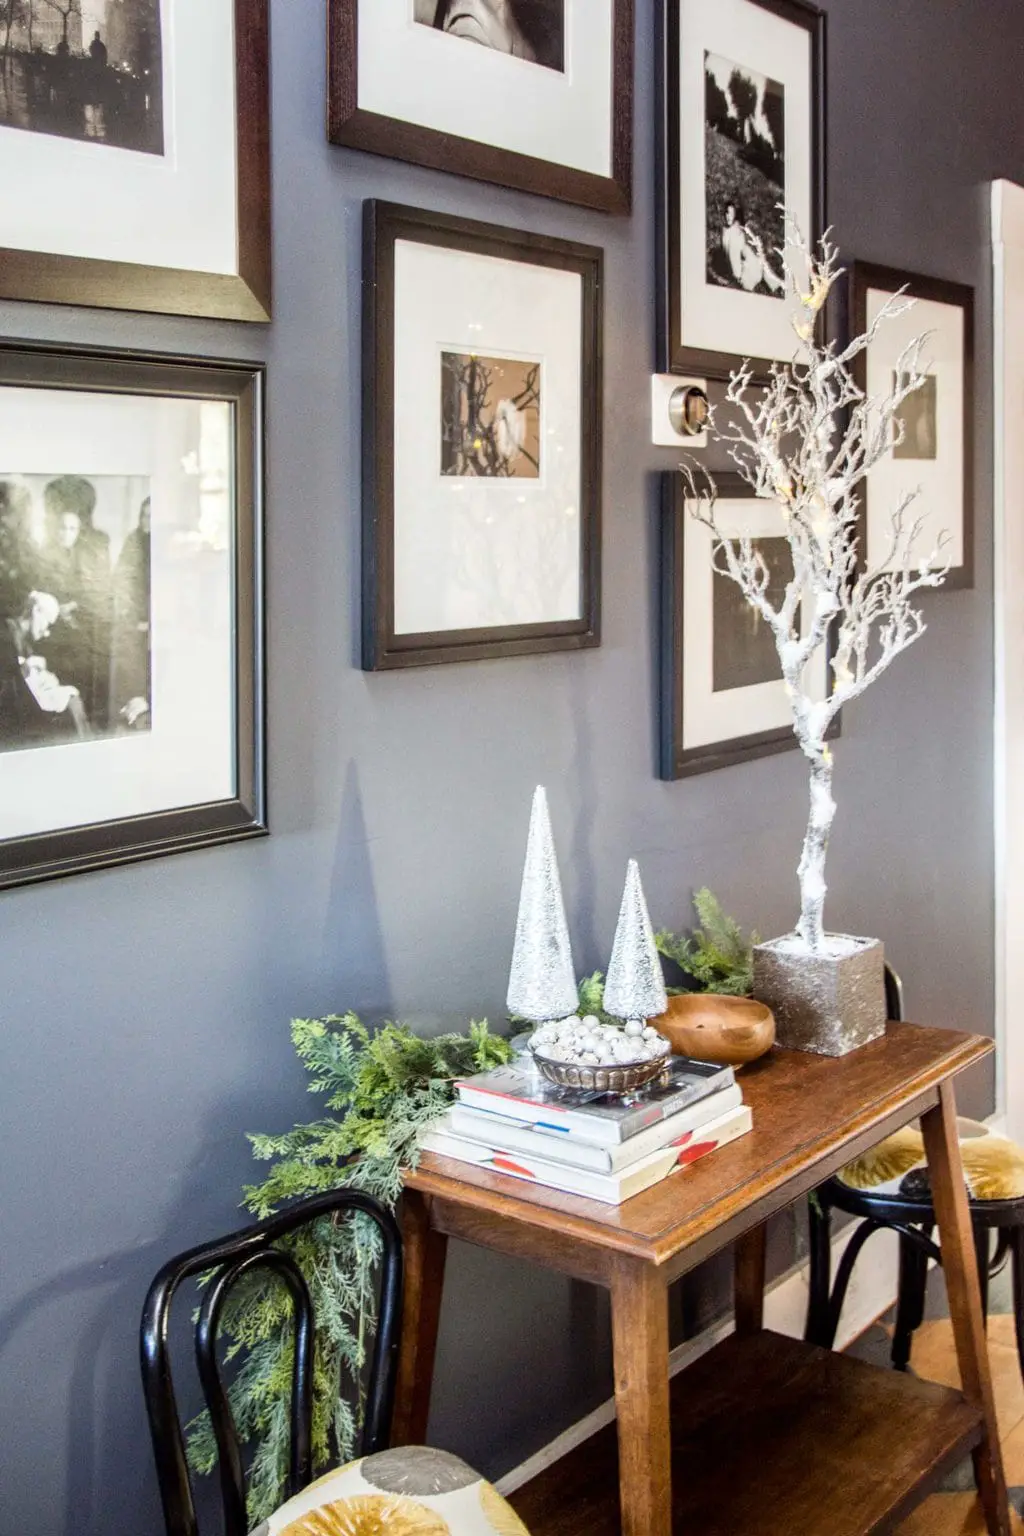 A Monochrome Holiday Entryway With Pier 1 Thou Swell